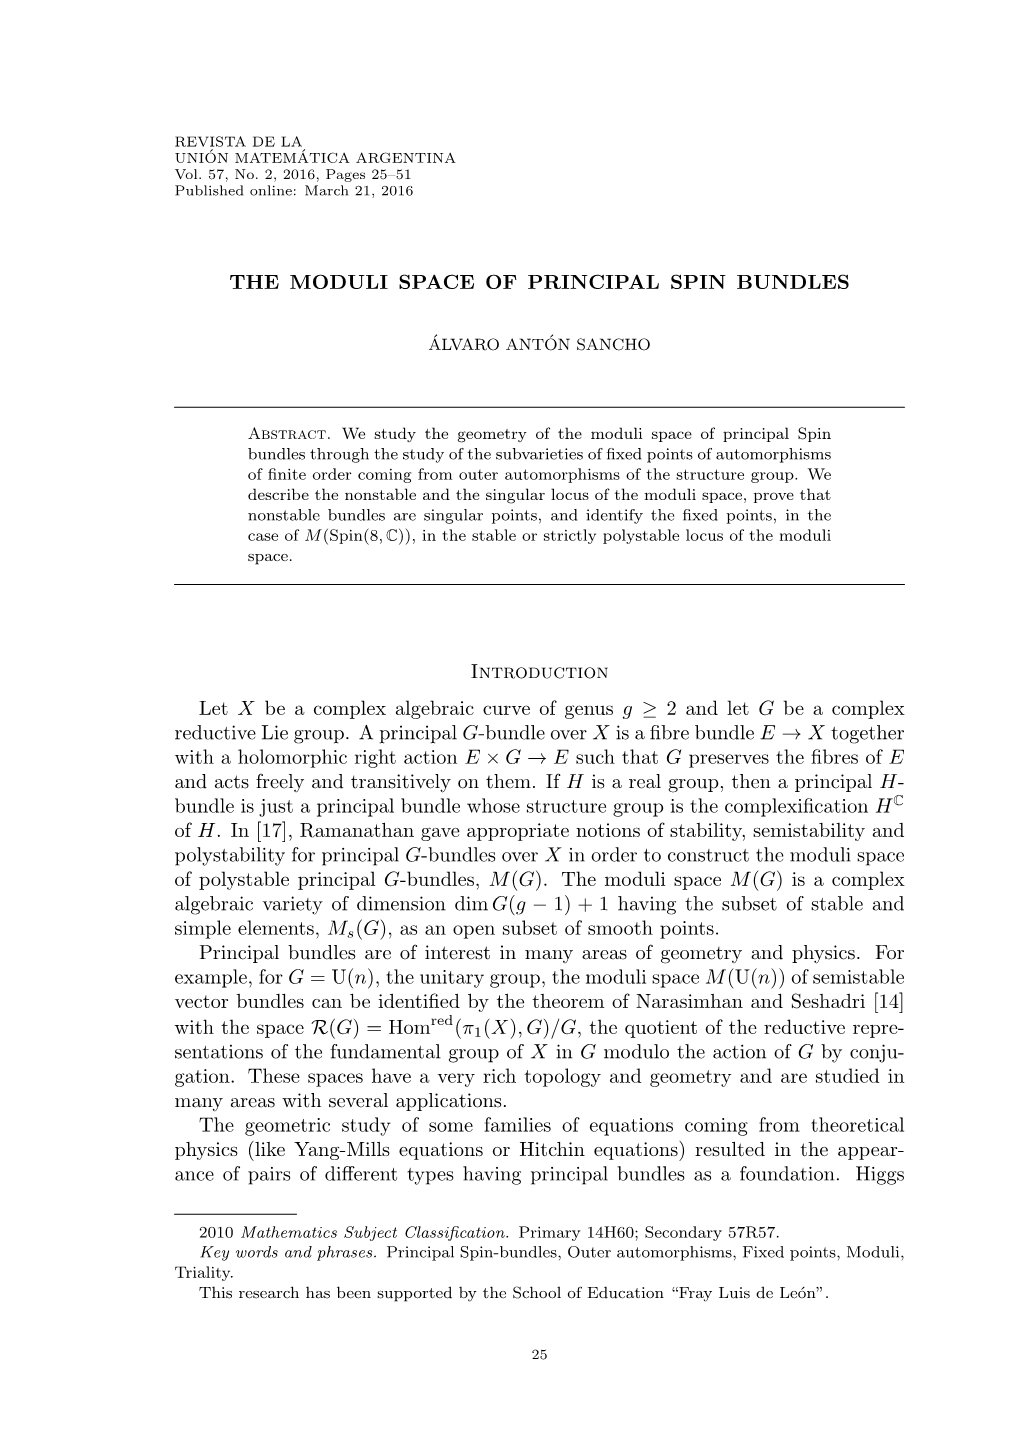 THE MODULI SPACE of PRINCIPAL SPIN BUNDLES Introduction Let X